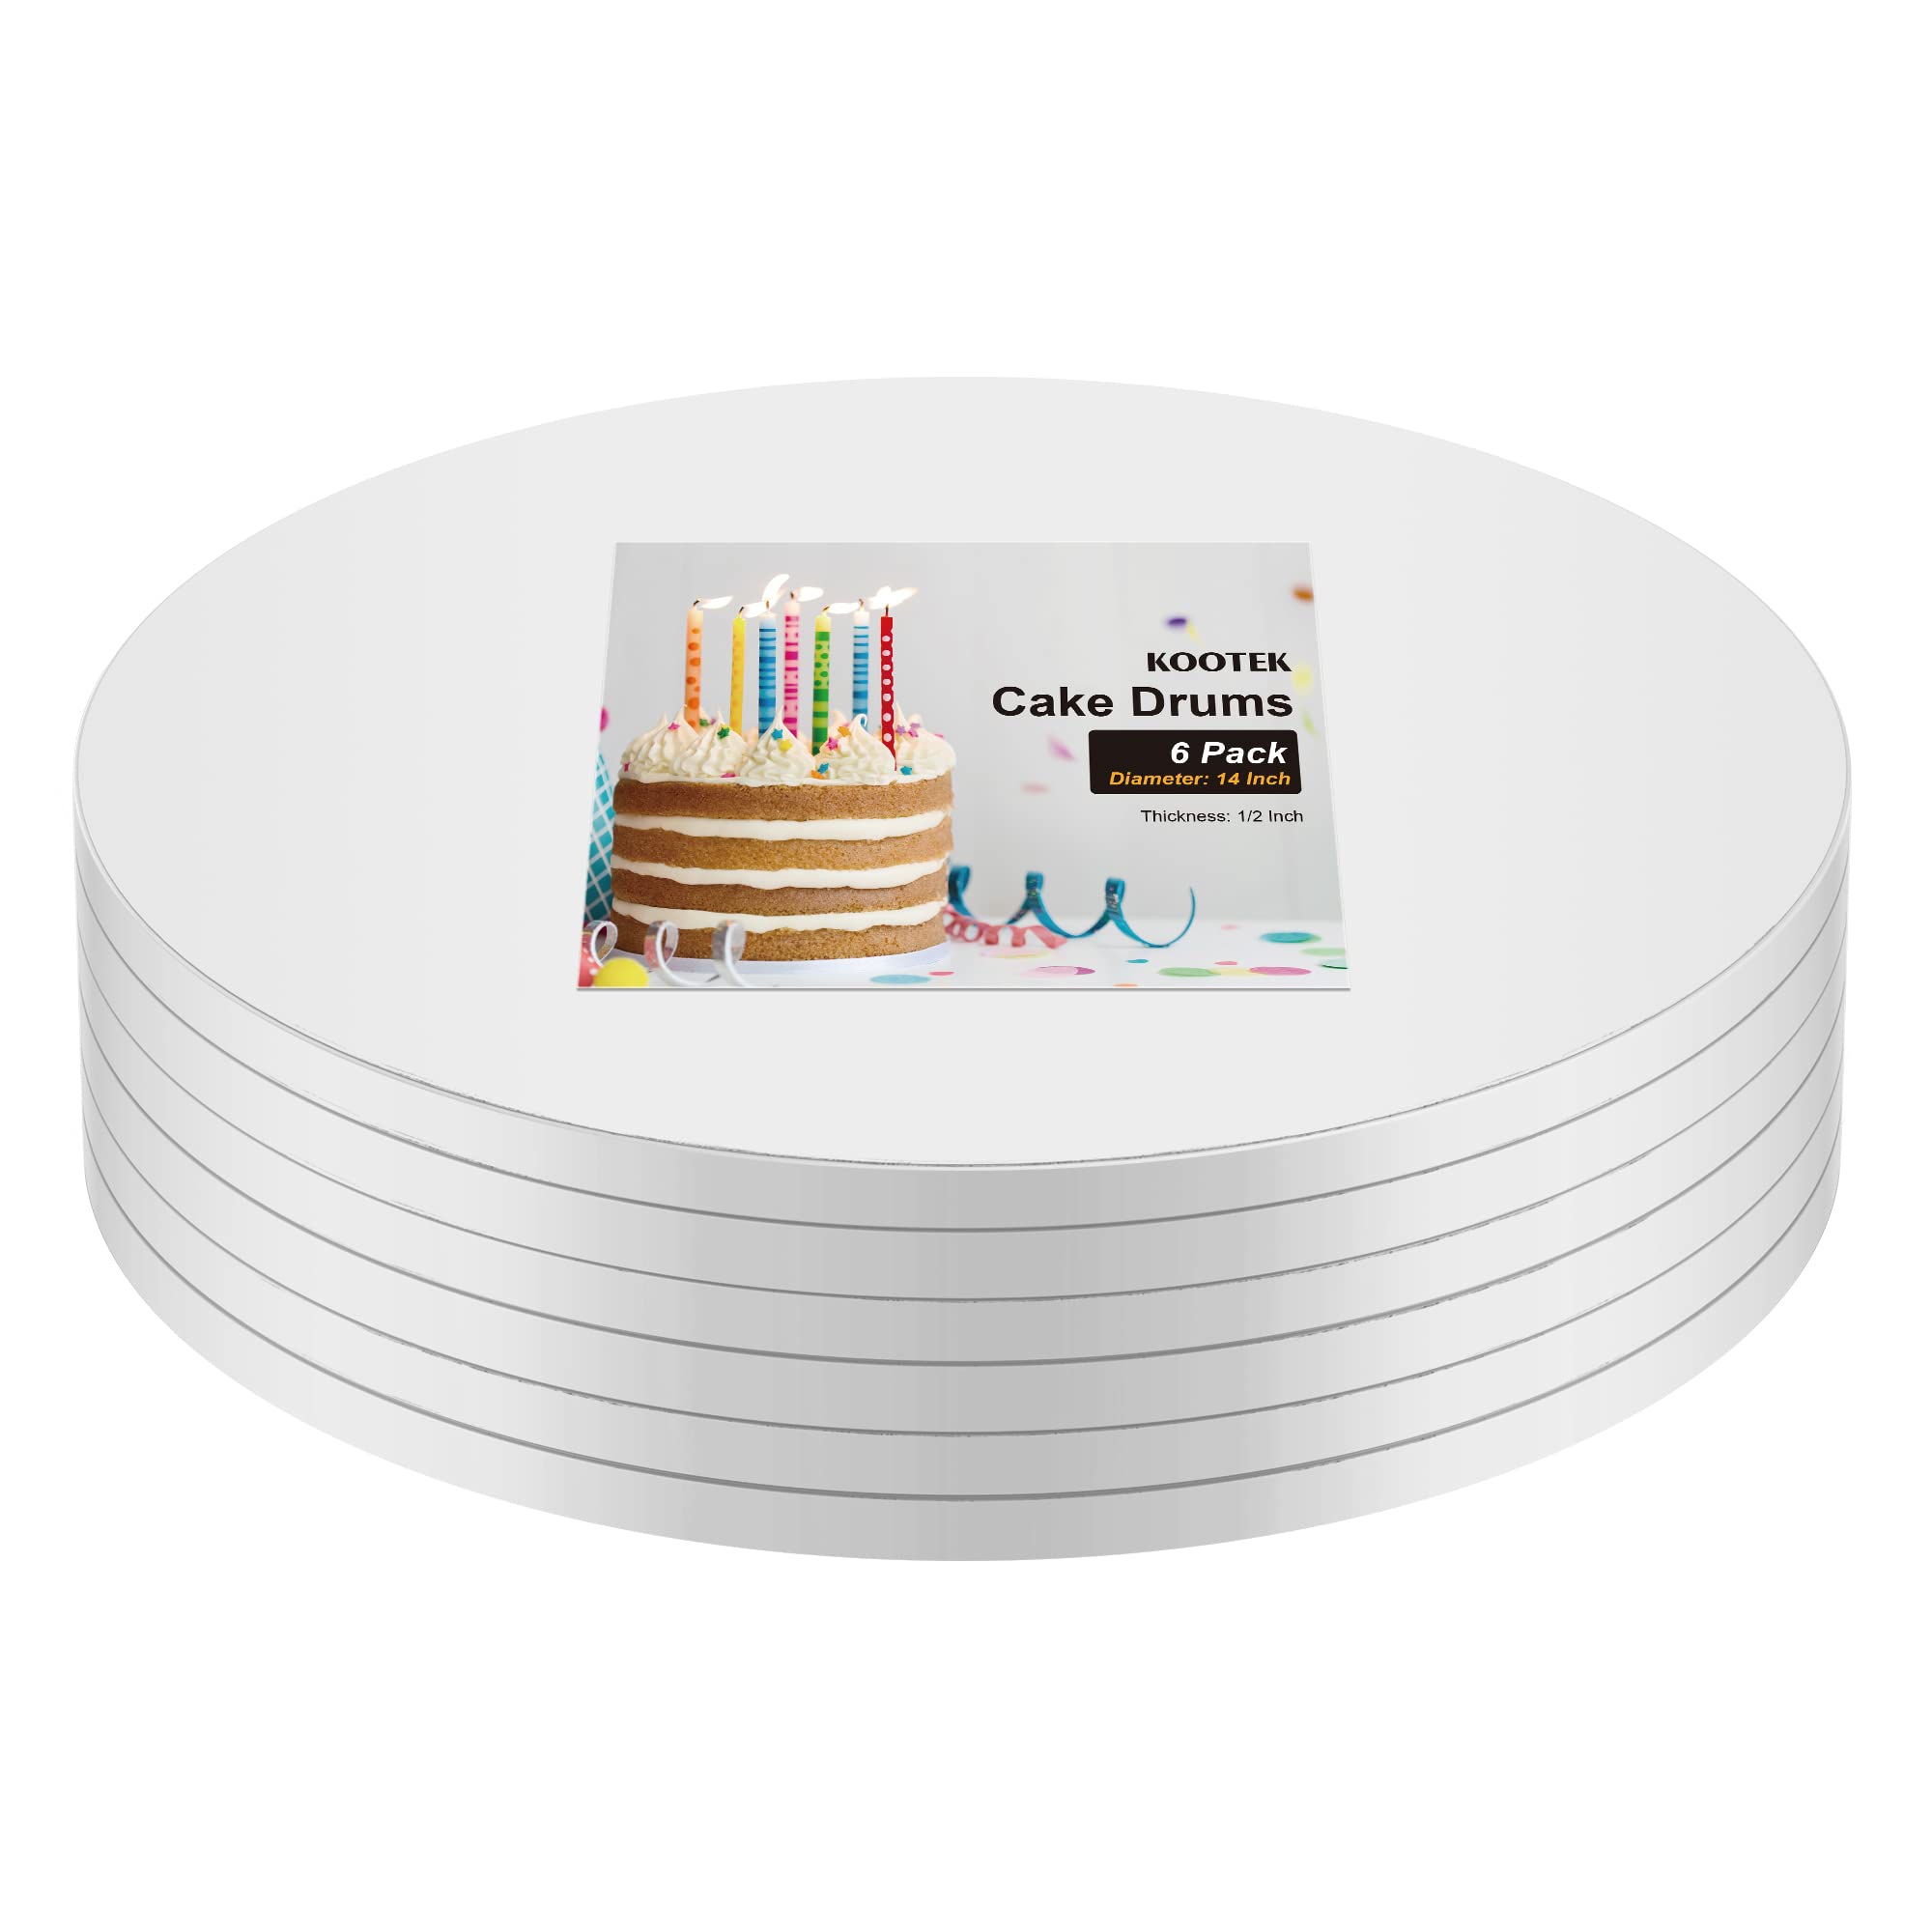 Kootek Cake Boards Drum 14 Inch Round, 1/2" Thick Cake Drums, Cake Decorating Supplies White 6 Pack Sturdy Cake Corrugated Cardboard for Multi-Layer Cakes